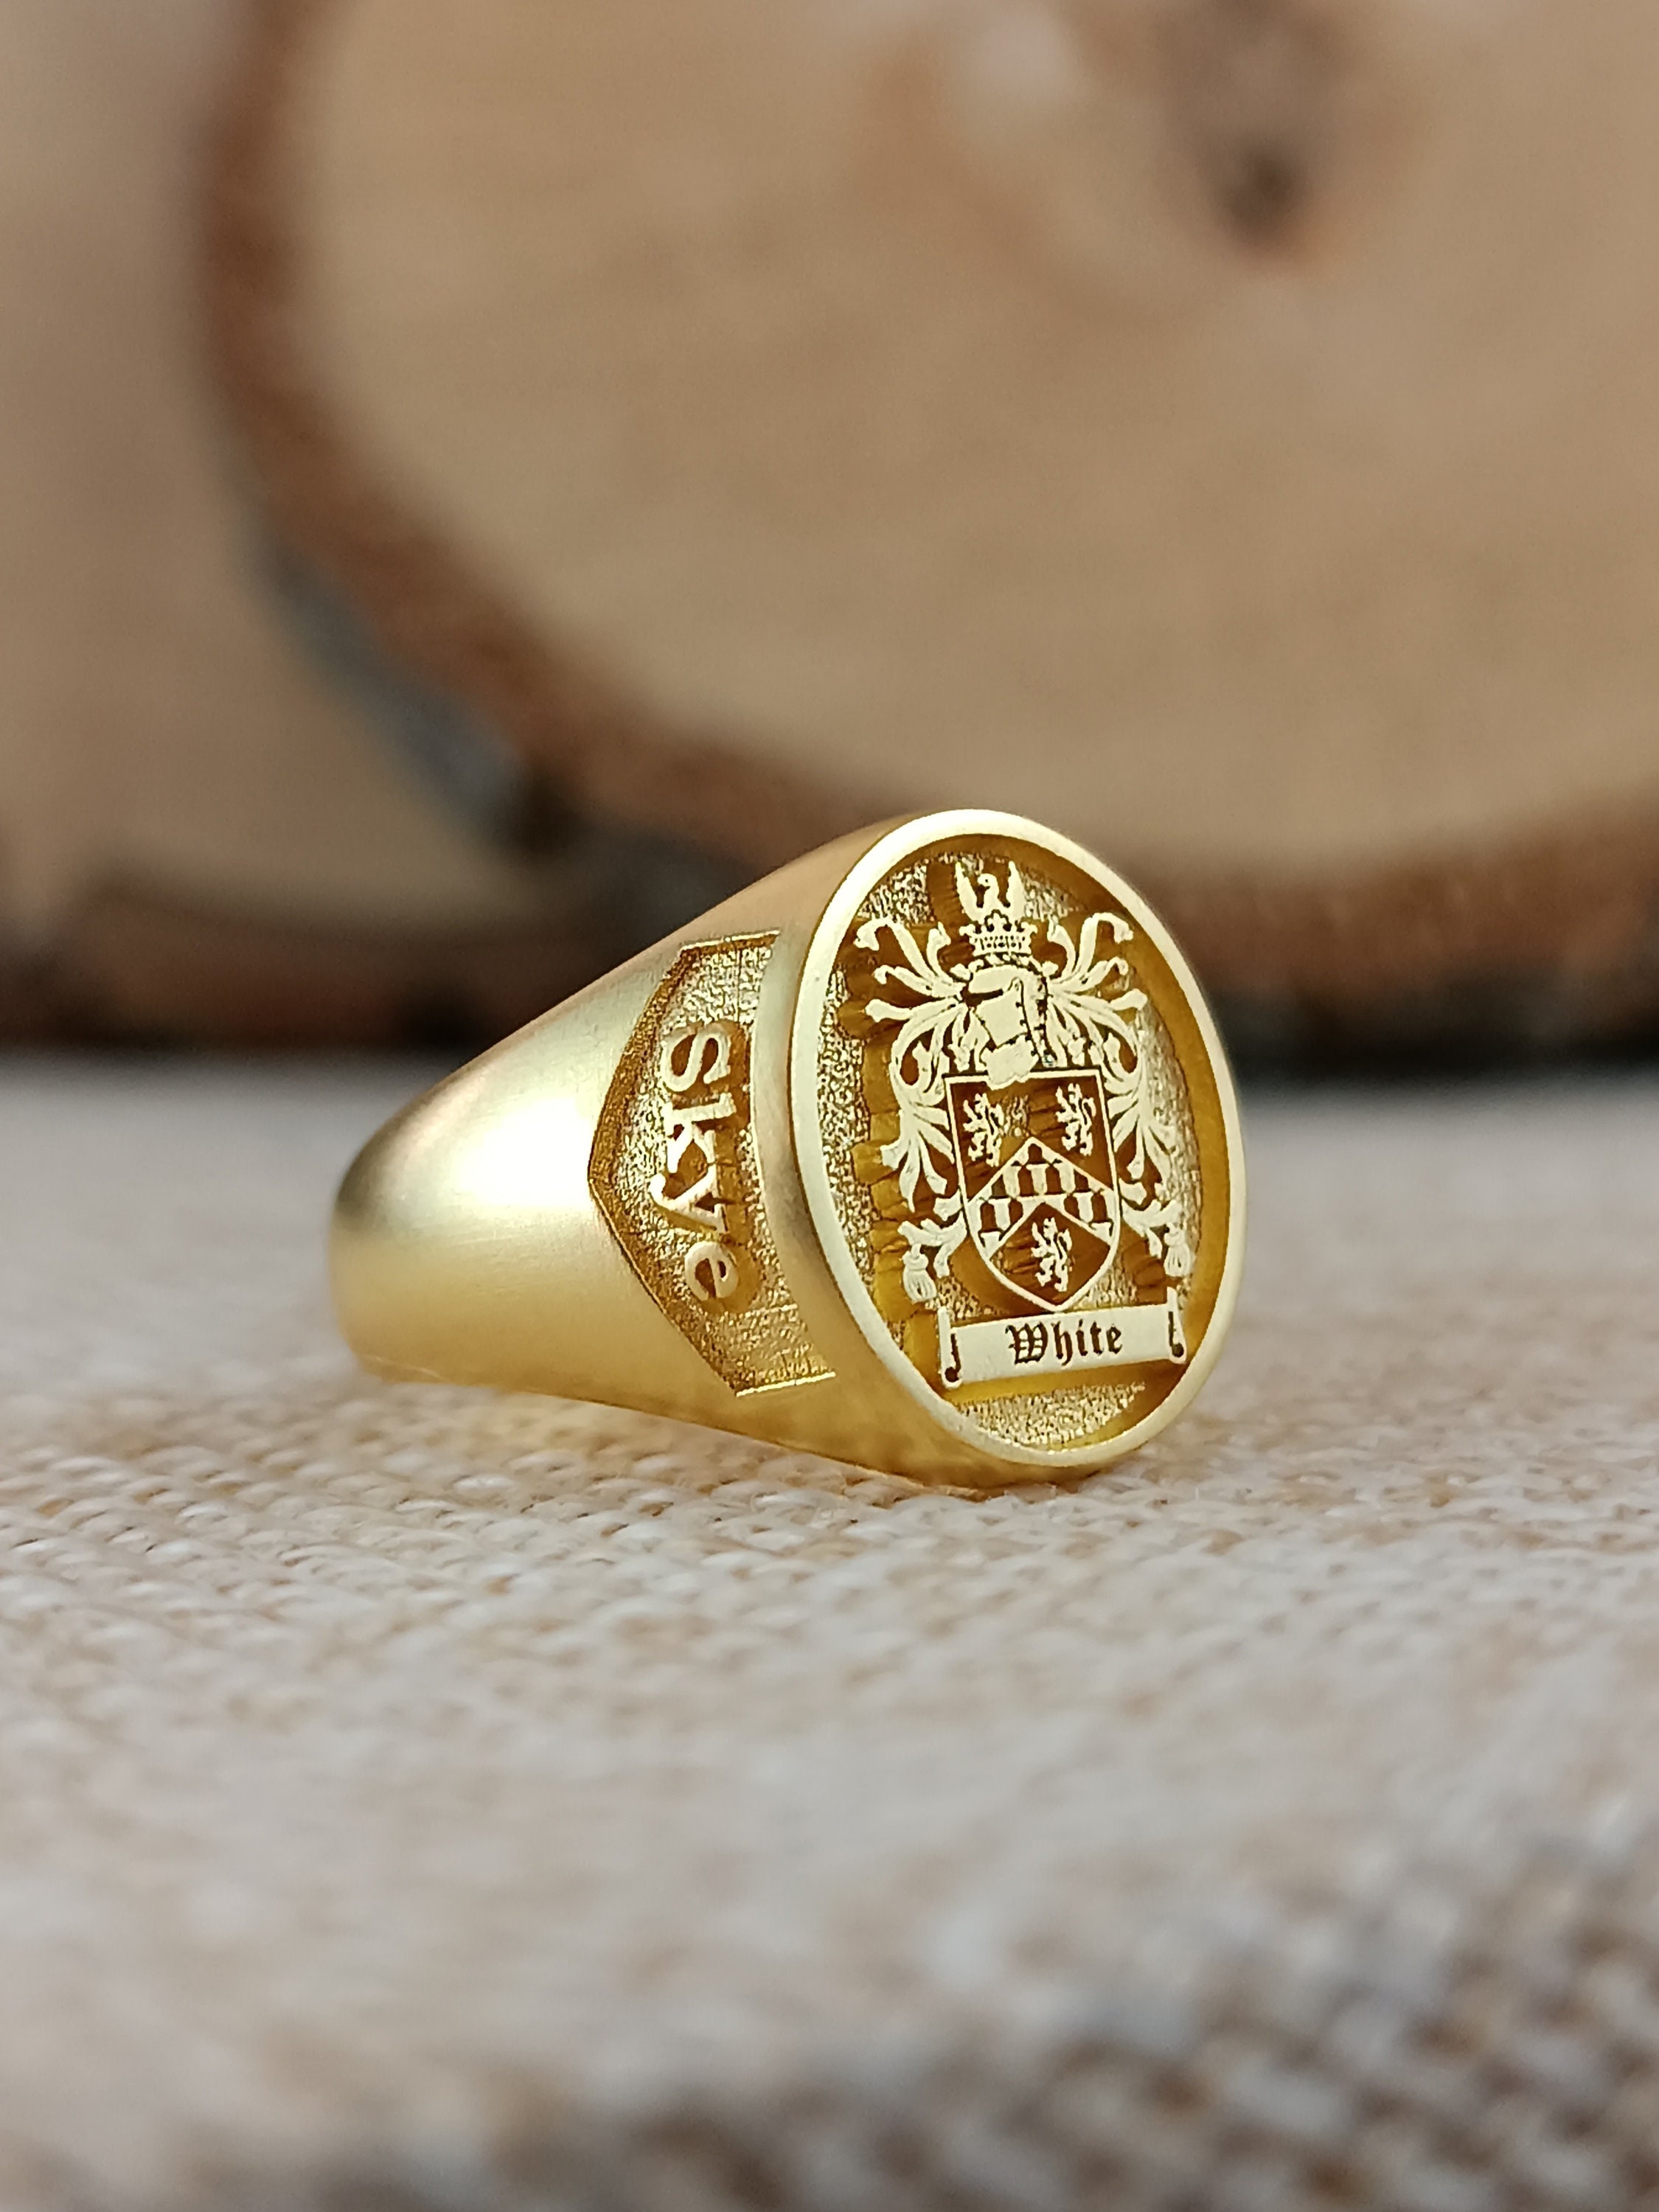 9 carat yellow gold signet ring with family crest engraving